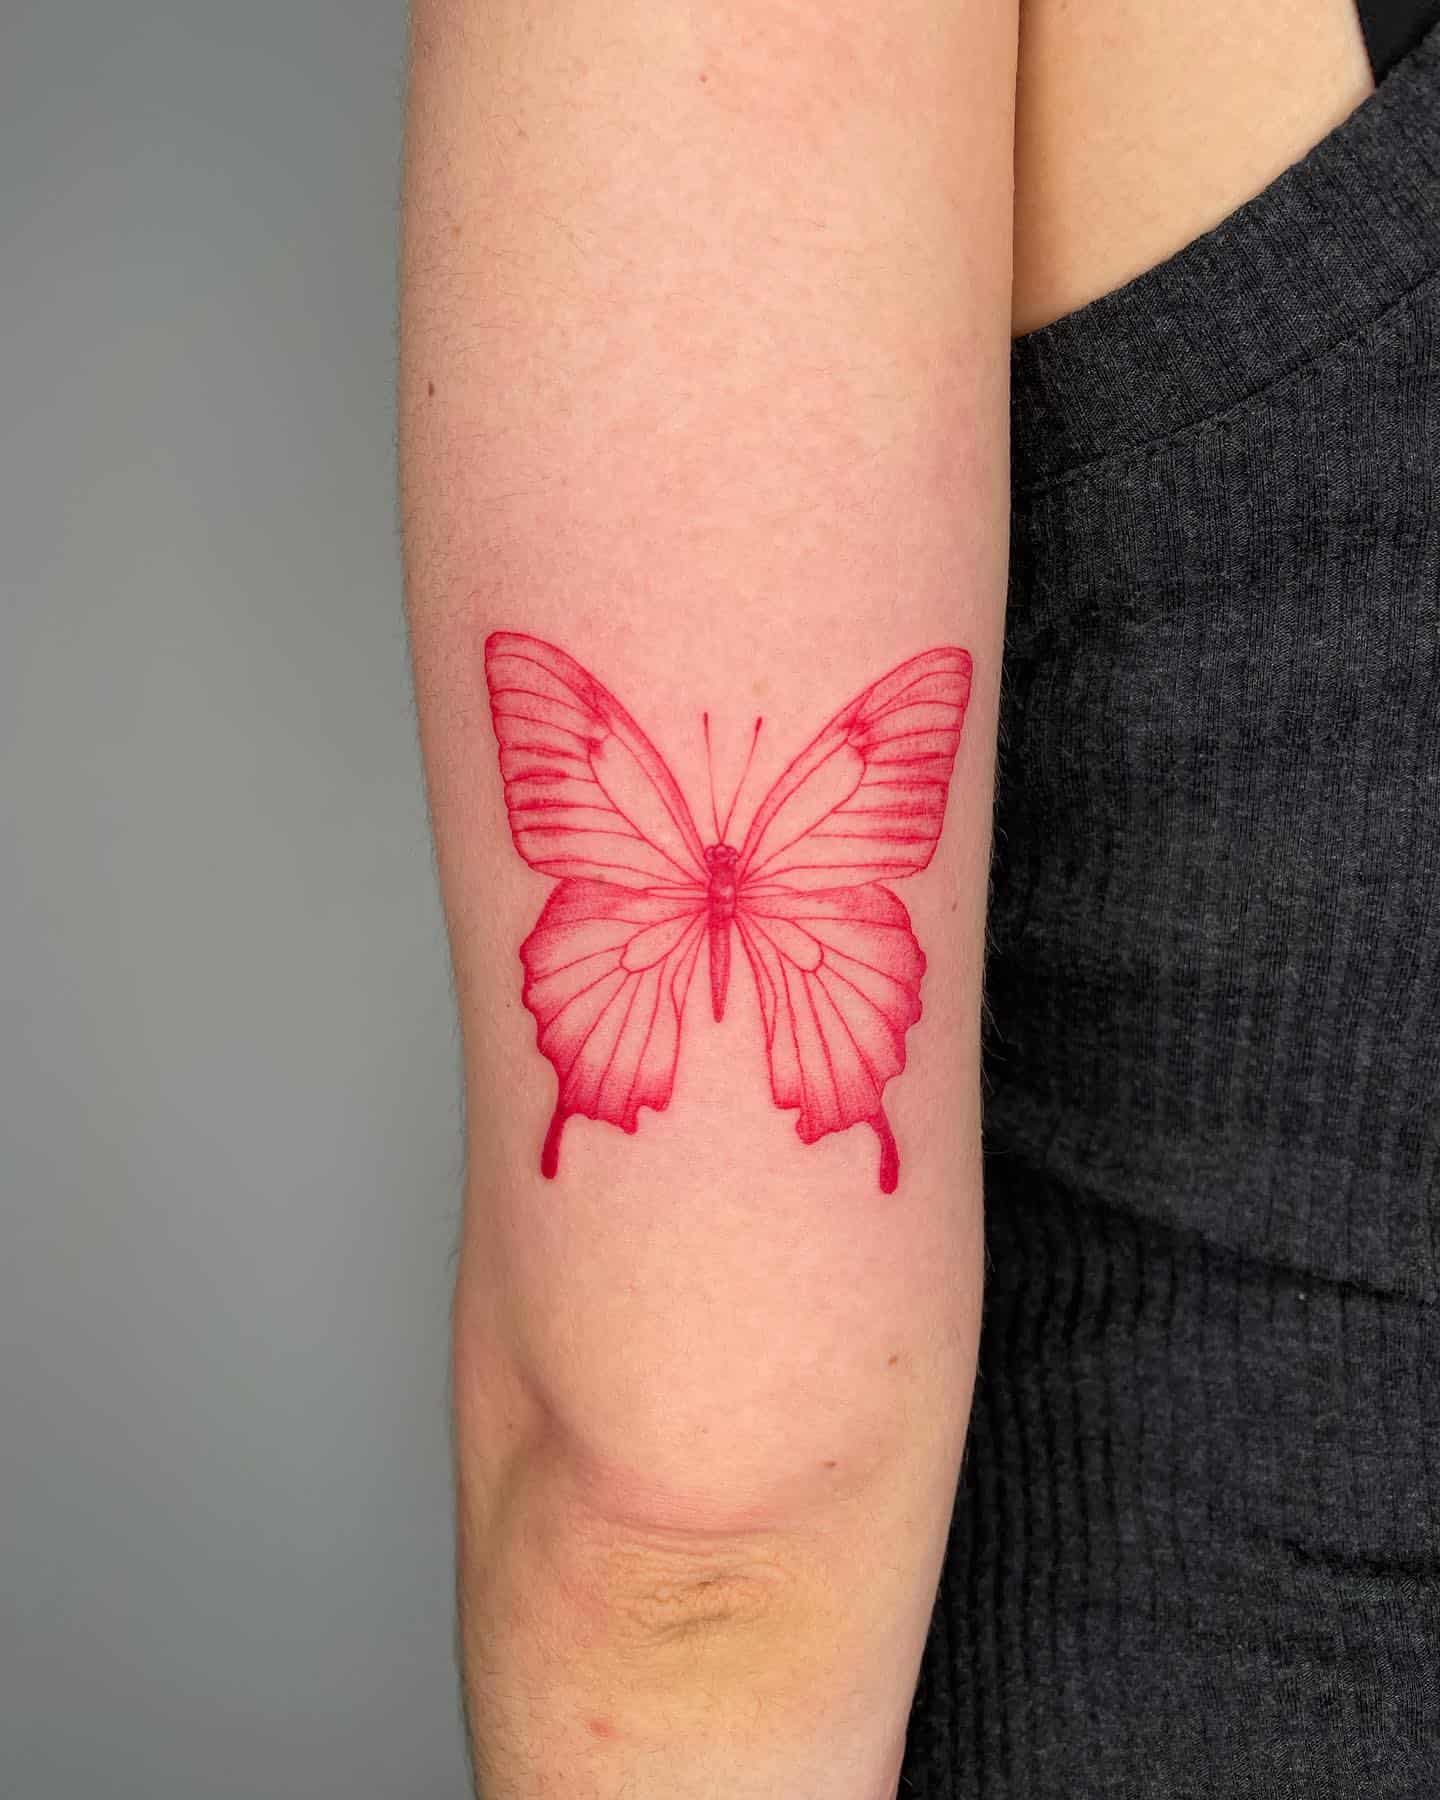 Customized Tiny Butterfly Tattoo done in red ink before lockdown Thanks   DM for Bookings tattoo cute tattoocute cutetattoo  Instagram